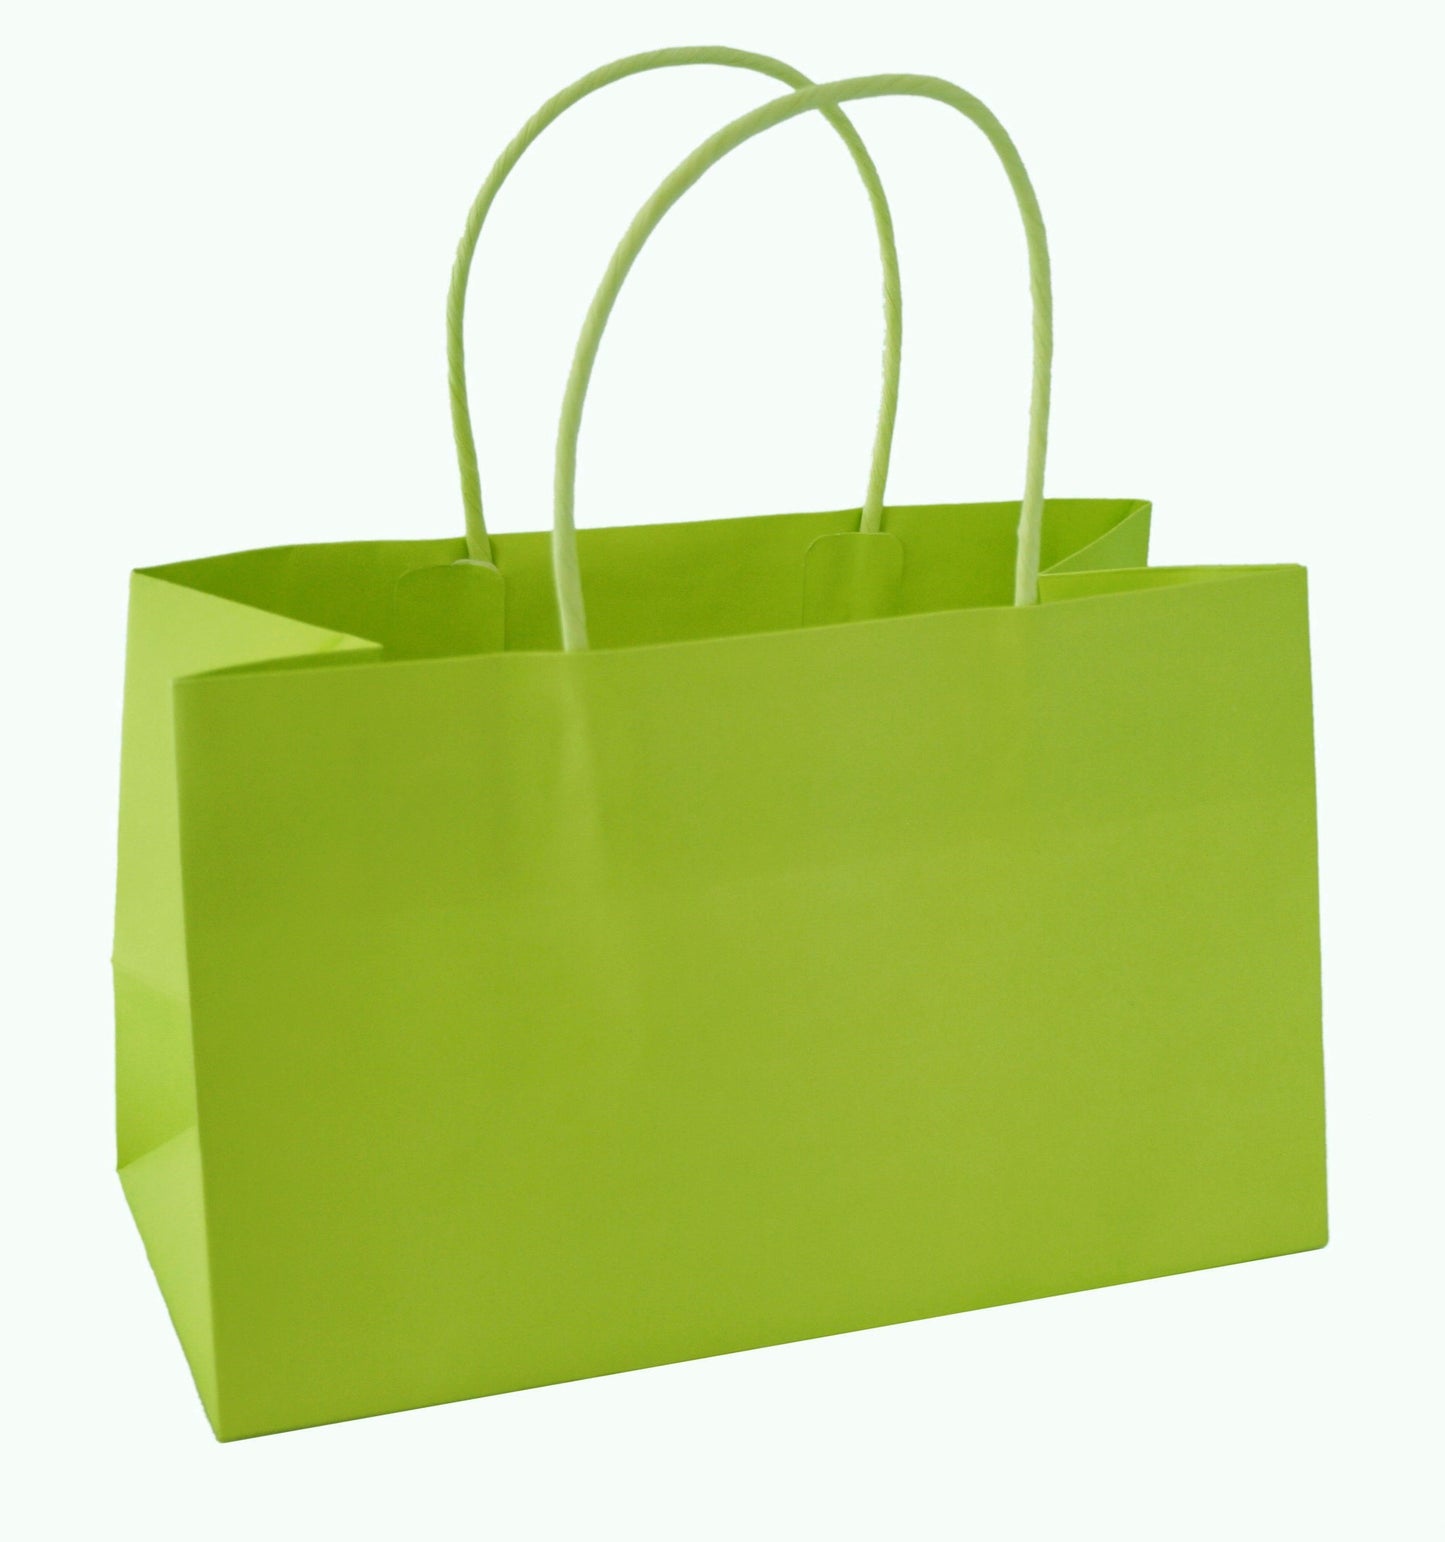 Presto Tote Gift Bag (Available in a variety of colours.)